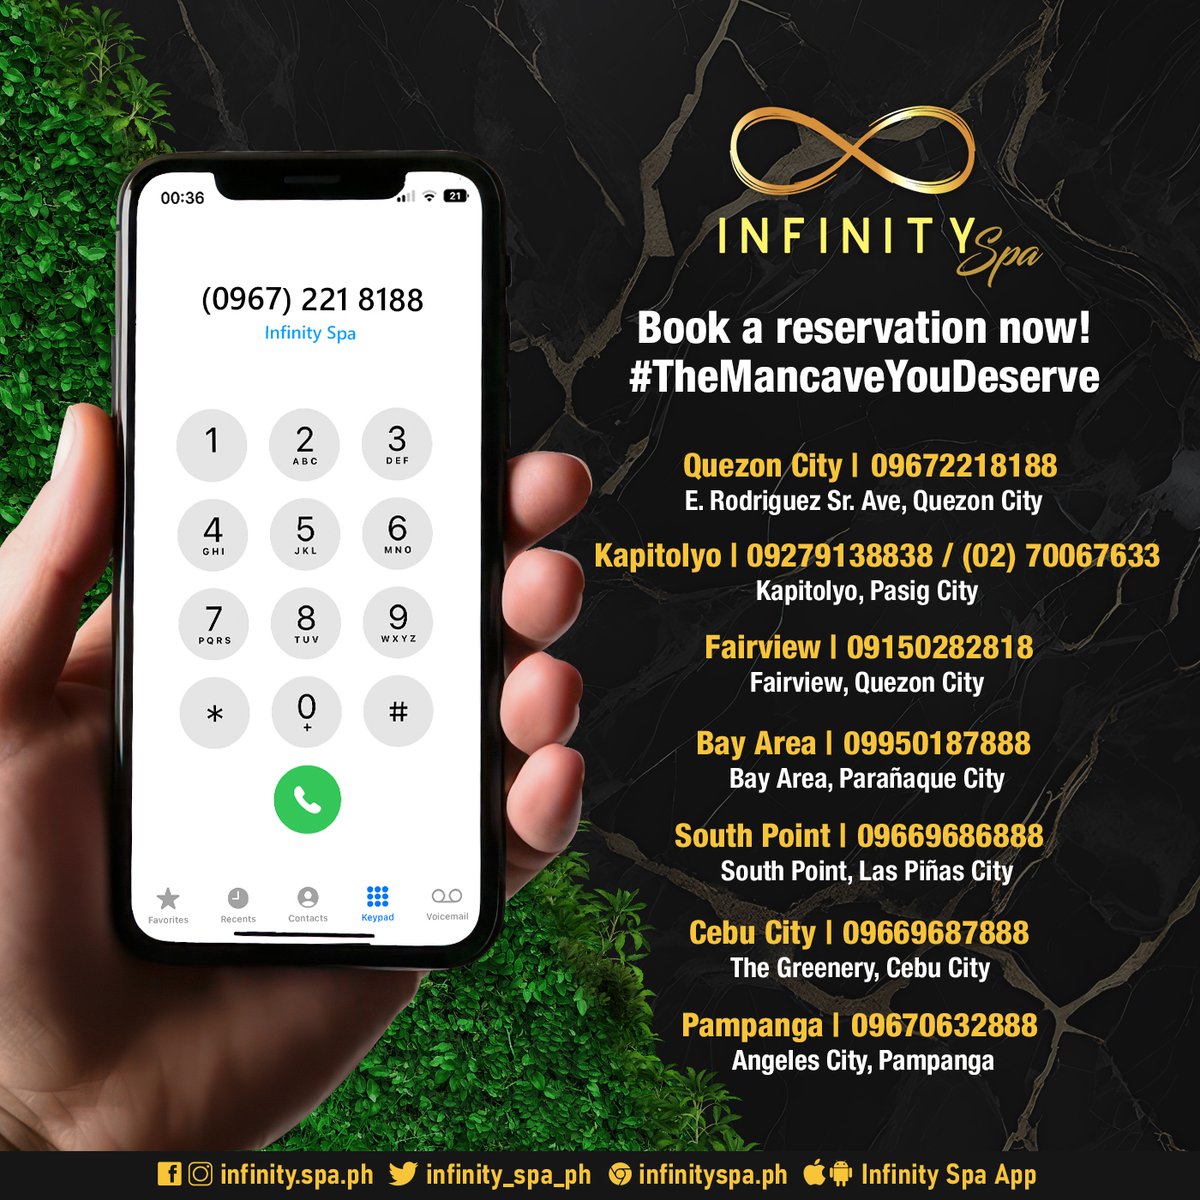 New contact details, same legendary relaxation! 🌈

#InfinitySpa, the Philippines' largest Mancave spa chain, now boasts 7 branches for your ultimate escape. Get those dialing fingers ready! 💛♾